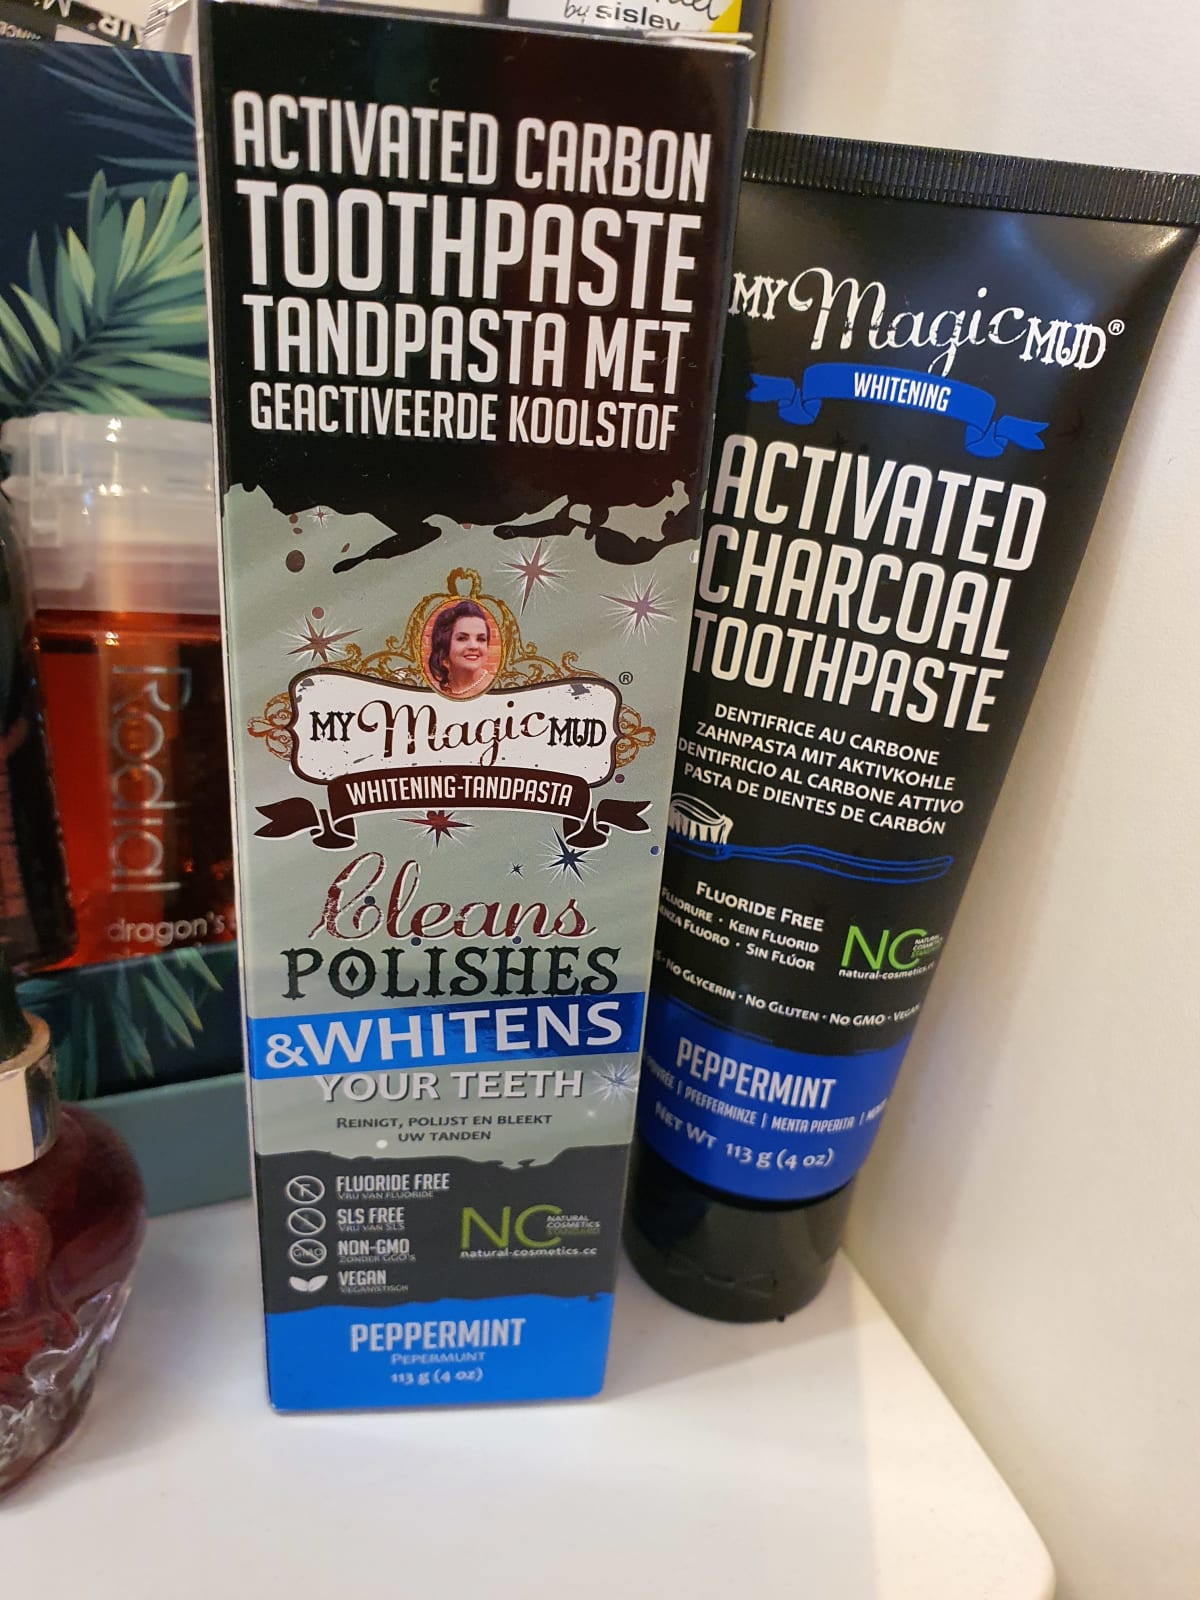 Activated Carbon Tandpasta (Charcoal Toothpaste Peppermint) - review image